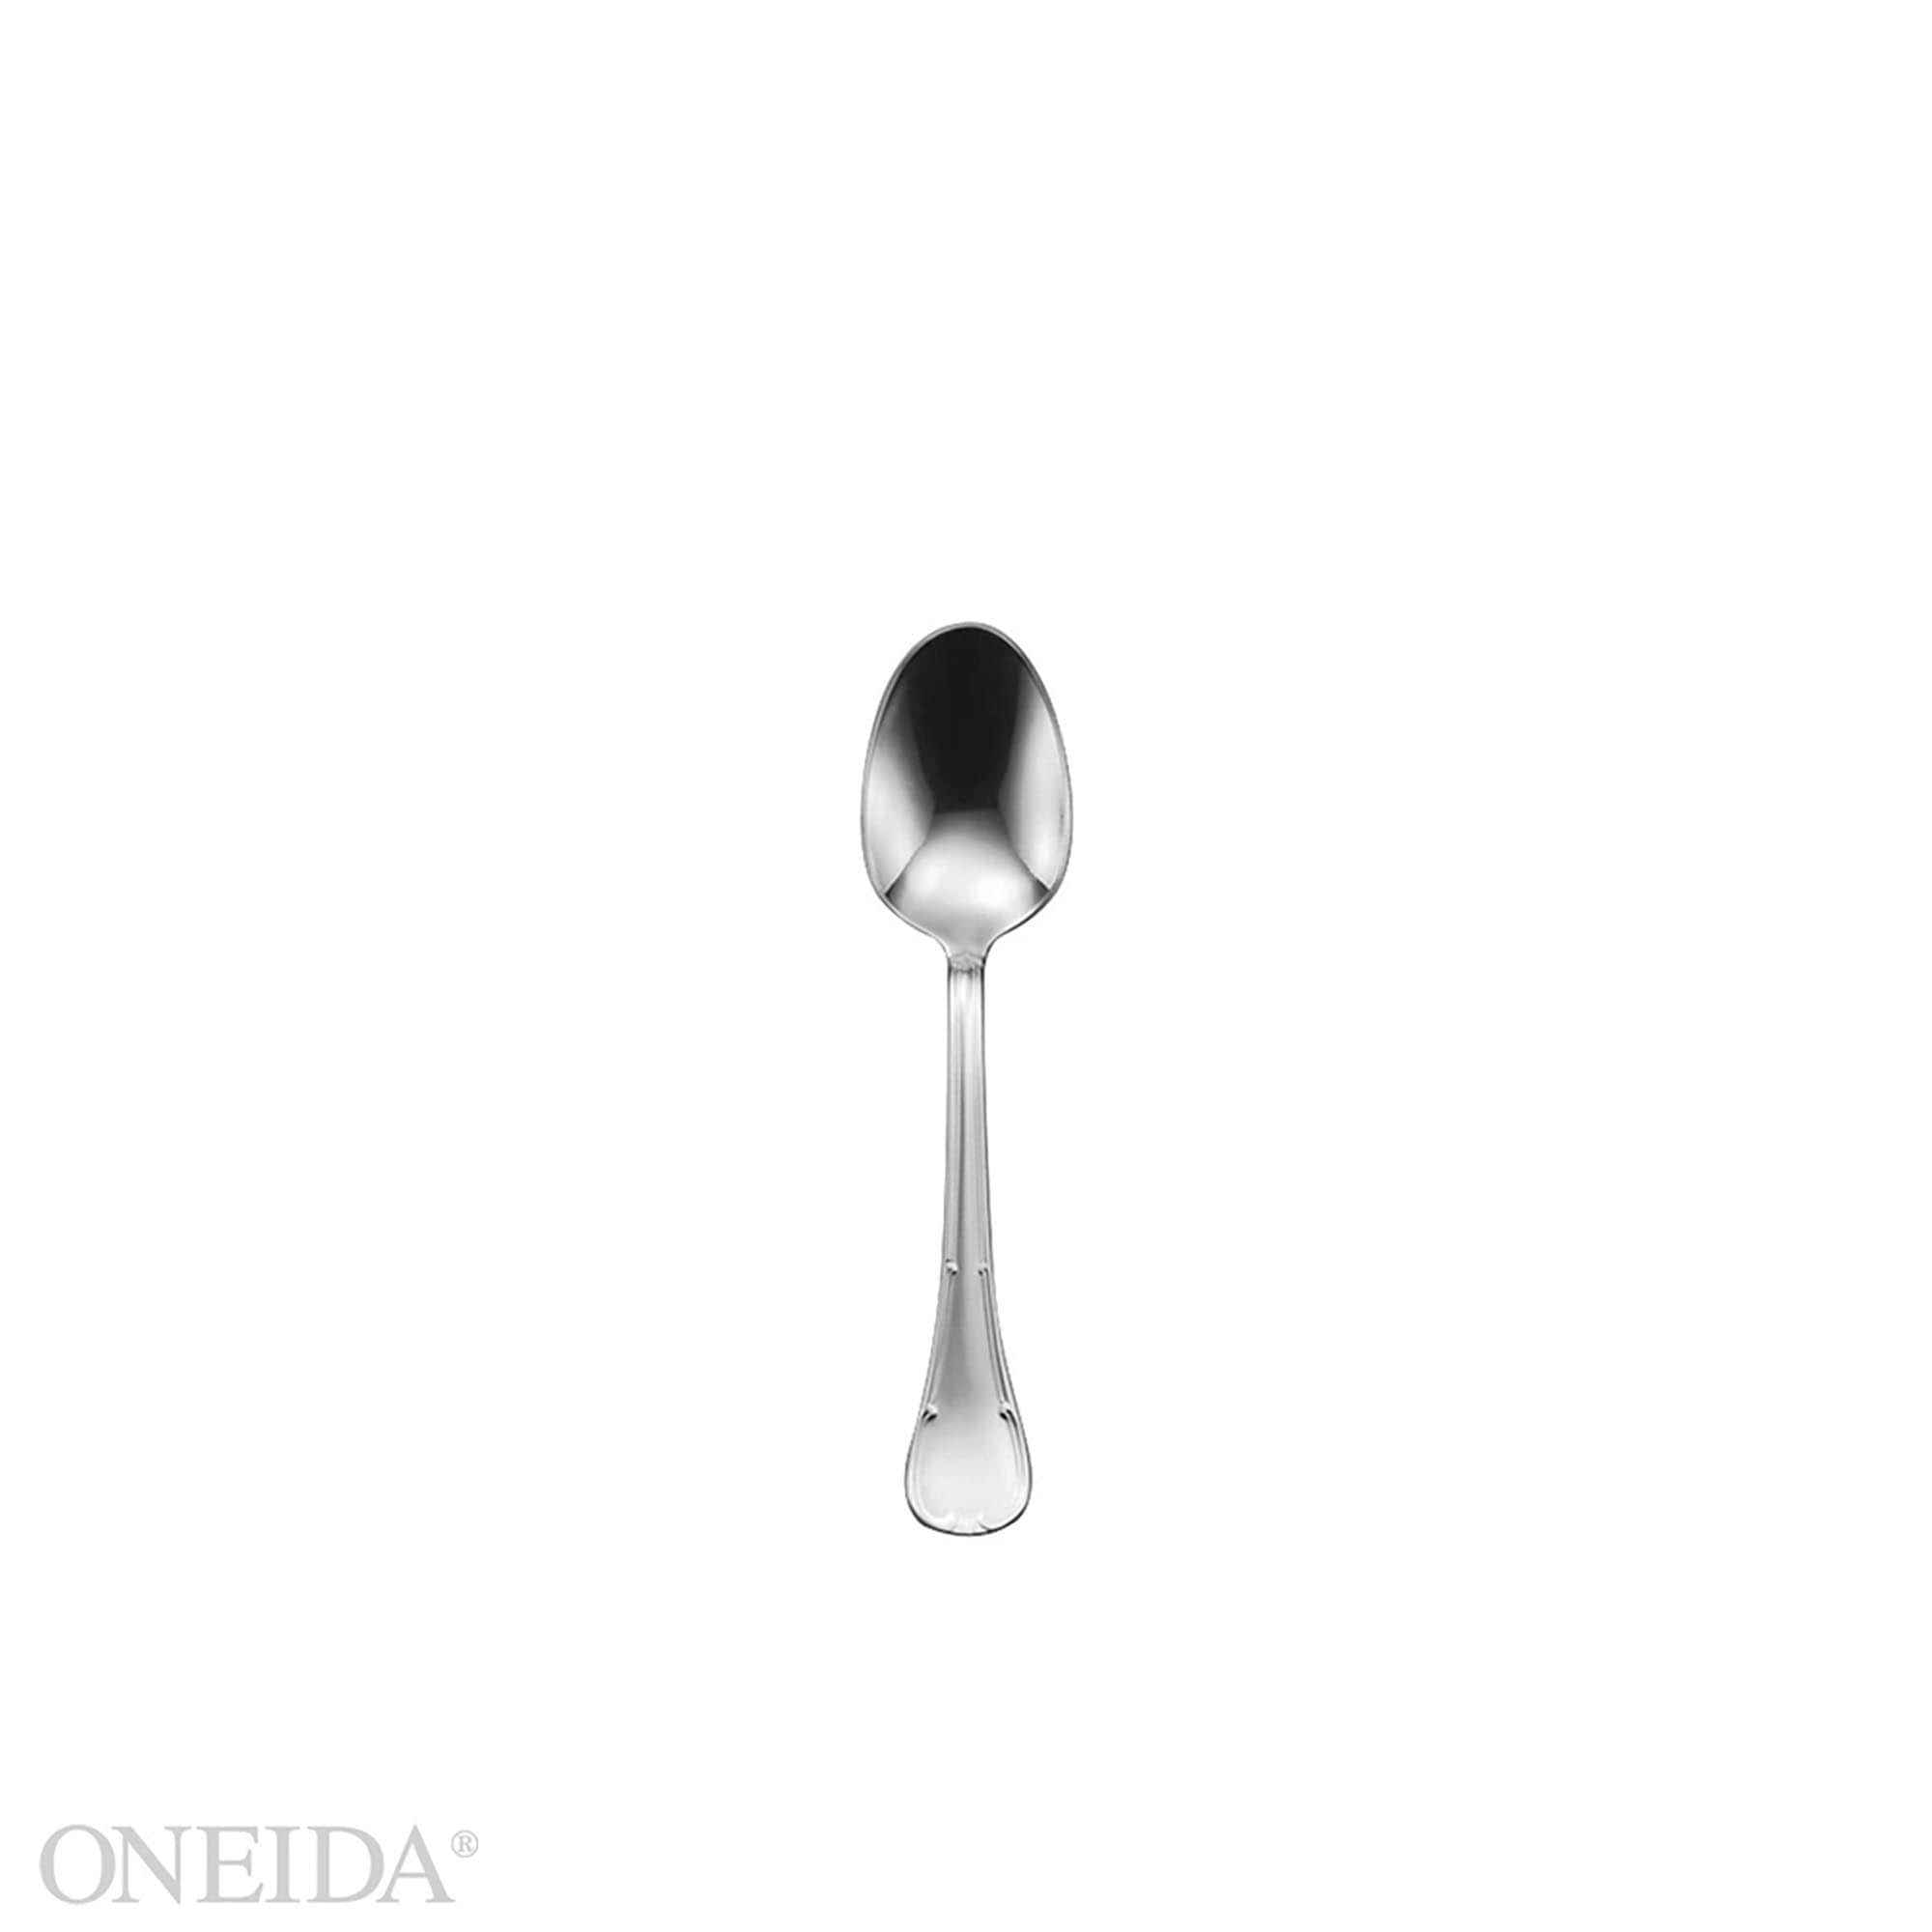 https://ak1.ostkcdn.com/images/products/is/images/direct/eec6935c085cb7dfe2b931eb0c3b1161afbda91a/Oneida-18-0-Stainless-Steel-Titian-Coffee-Spoons-%28Set-of-12%29.jpg